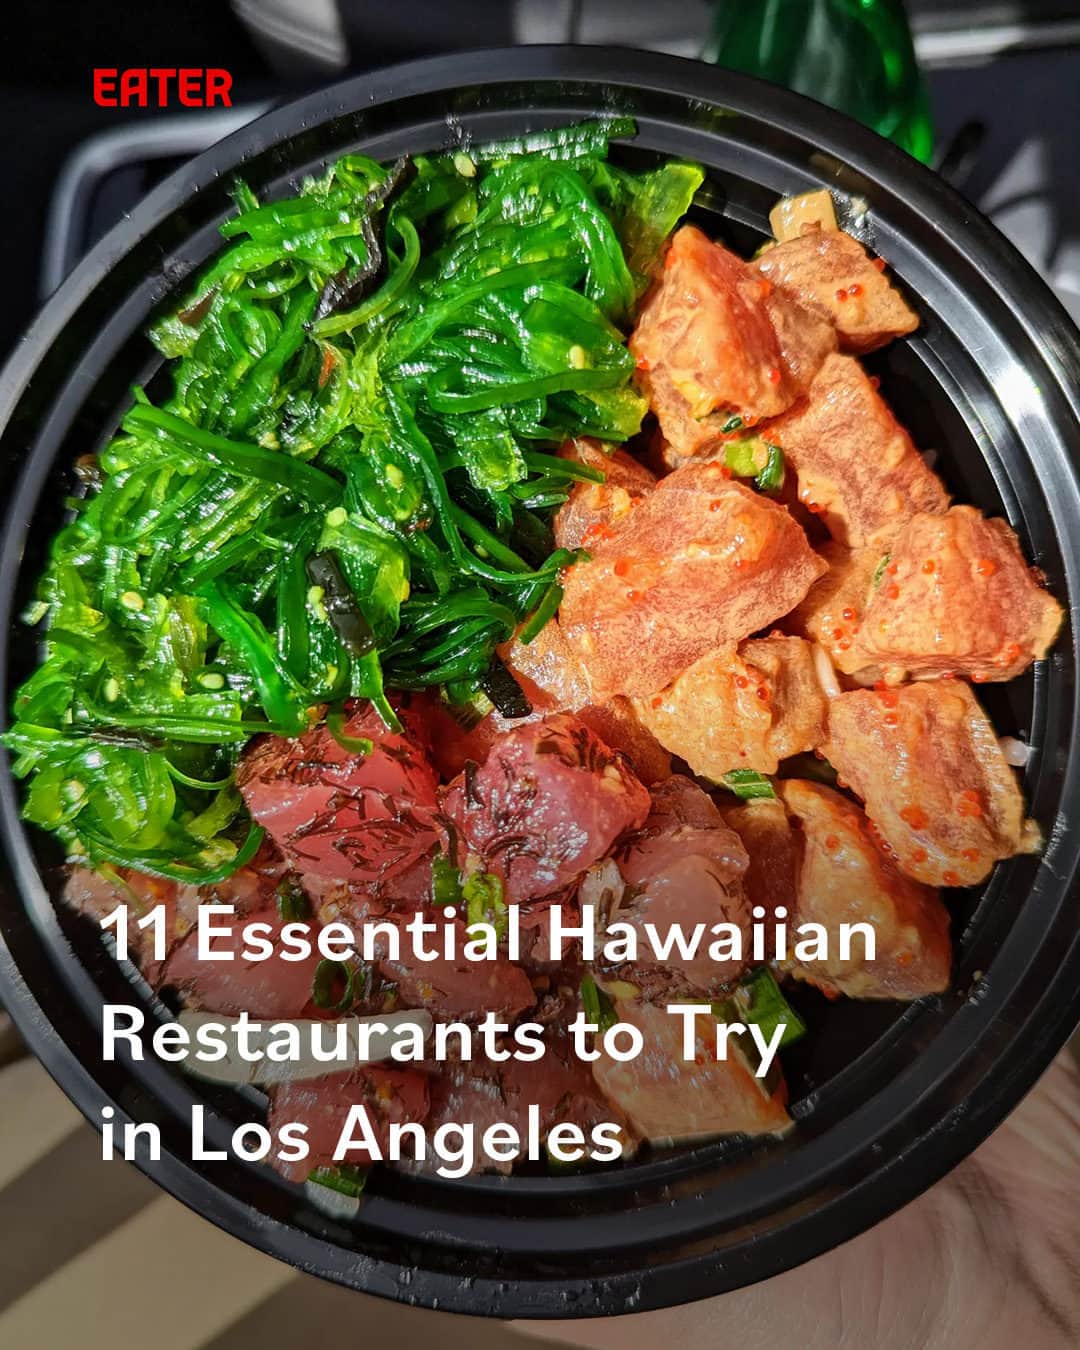 Eater LAのインスタグラム：「Nearly 40,000 Native Hawaiians call Los Angeles home. The islands’ former residents, like the Big Island’s Maile and Bruce Goold, and Kevin Lee, who grew up working in his family’s Korean restaurant Sorabol in Honolulu, make eating Kahuku-style fried shrimp, shave ice, and saimin so enjoyable on the Mainland.   From bowling alley diners to poke shacks, tap the link in bio for the 11 best Hawaiian restaurants in LA by Eater LA contributor Kat Hong (@prosciuttogirl69).  📸: @mattatouille」